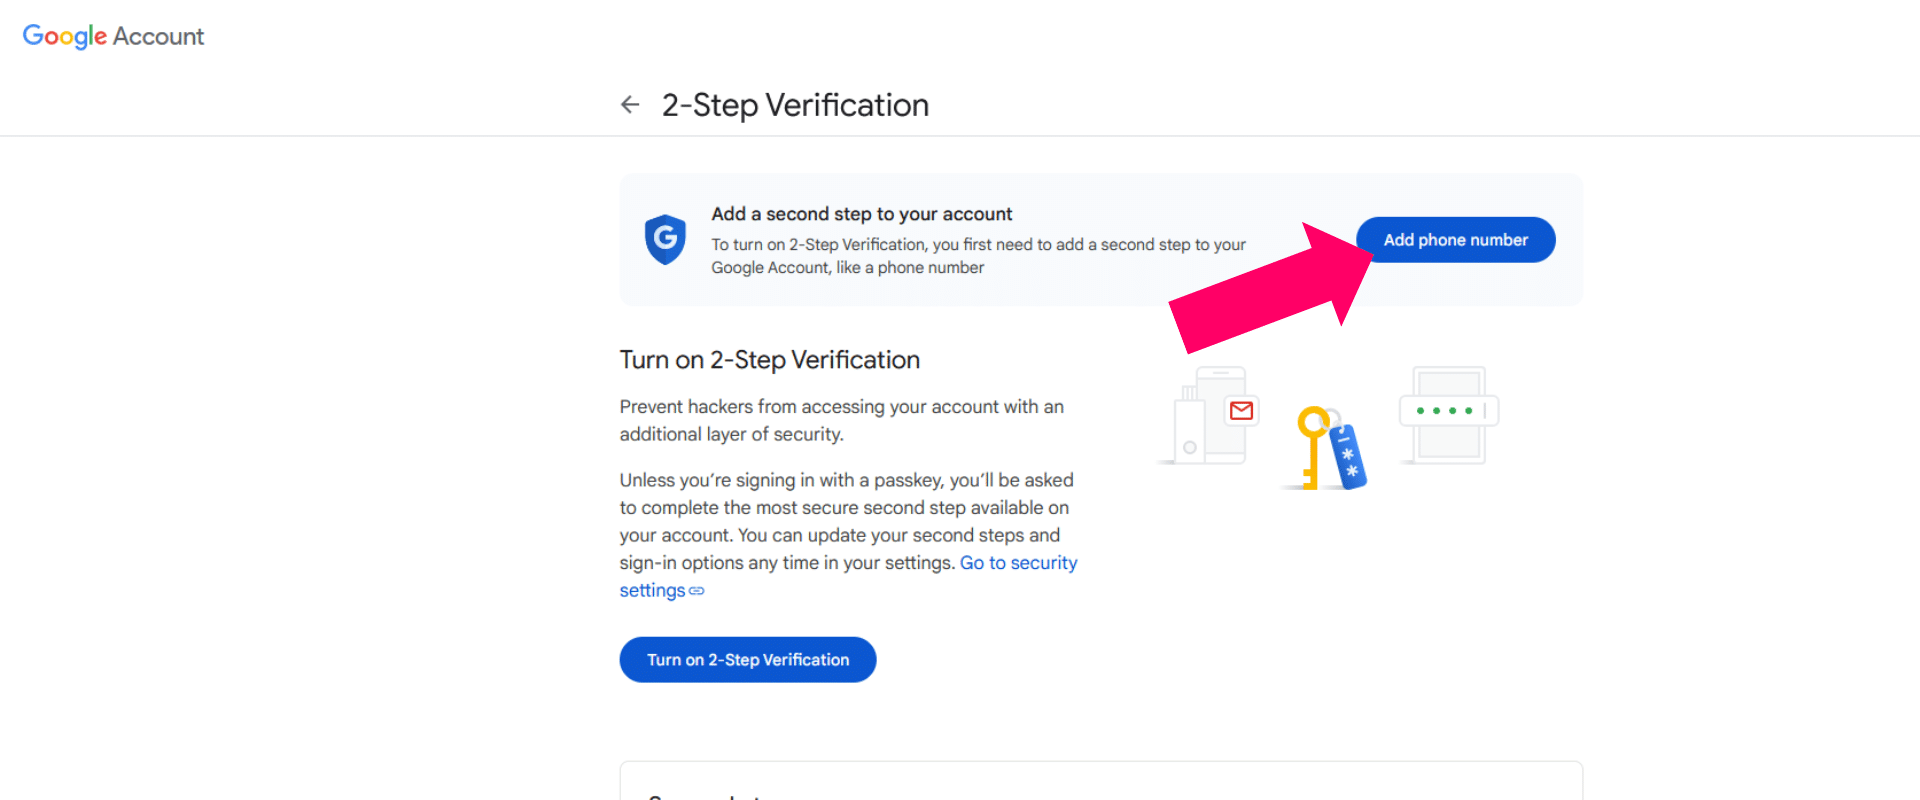 Access Security Settings: Click on the 'Security' tab.<br />
Enable Two-step Verification: Under 'Signing in to Google', click on 'Two-step Verification'. Follow the on-screen instructions to add your phone number and verify it with a code received via text.